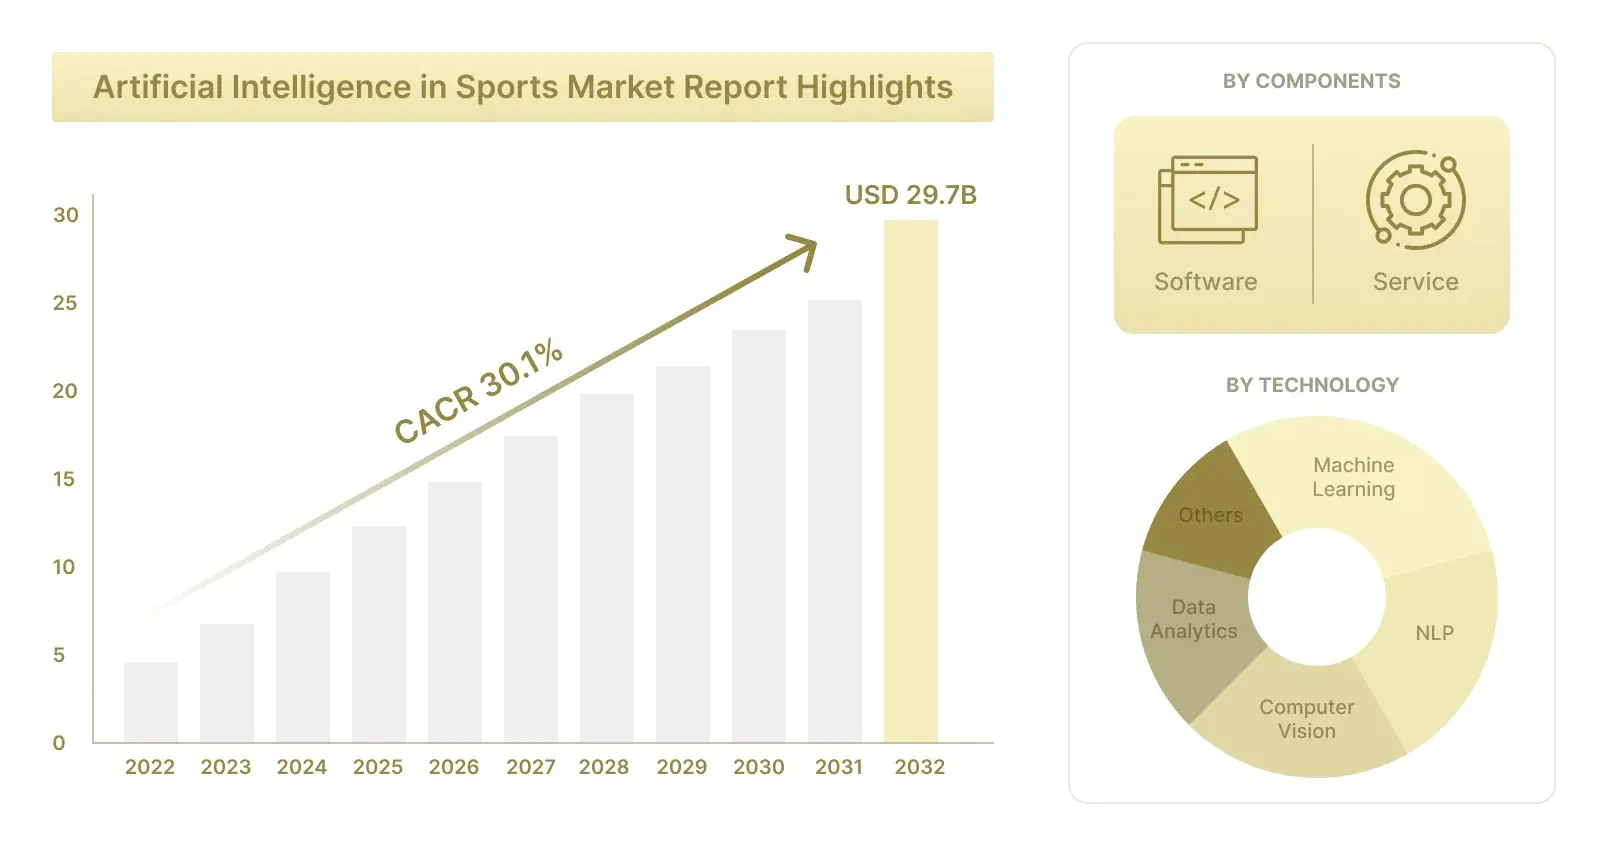 Artificial Intelligence in Sports Market Report Highlights